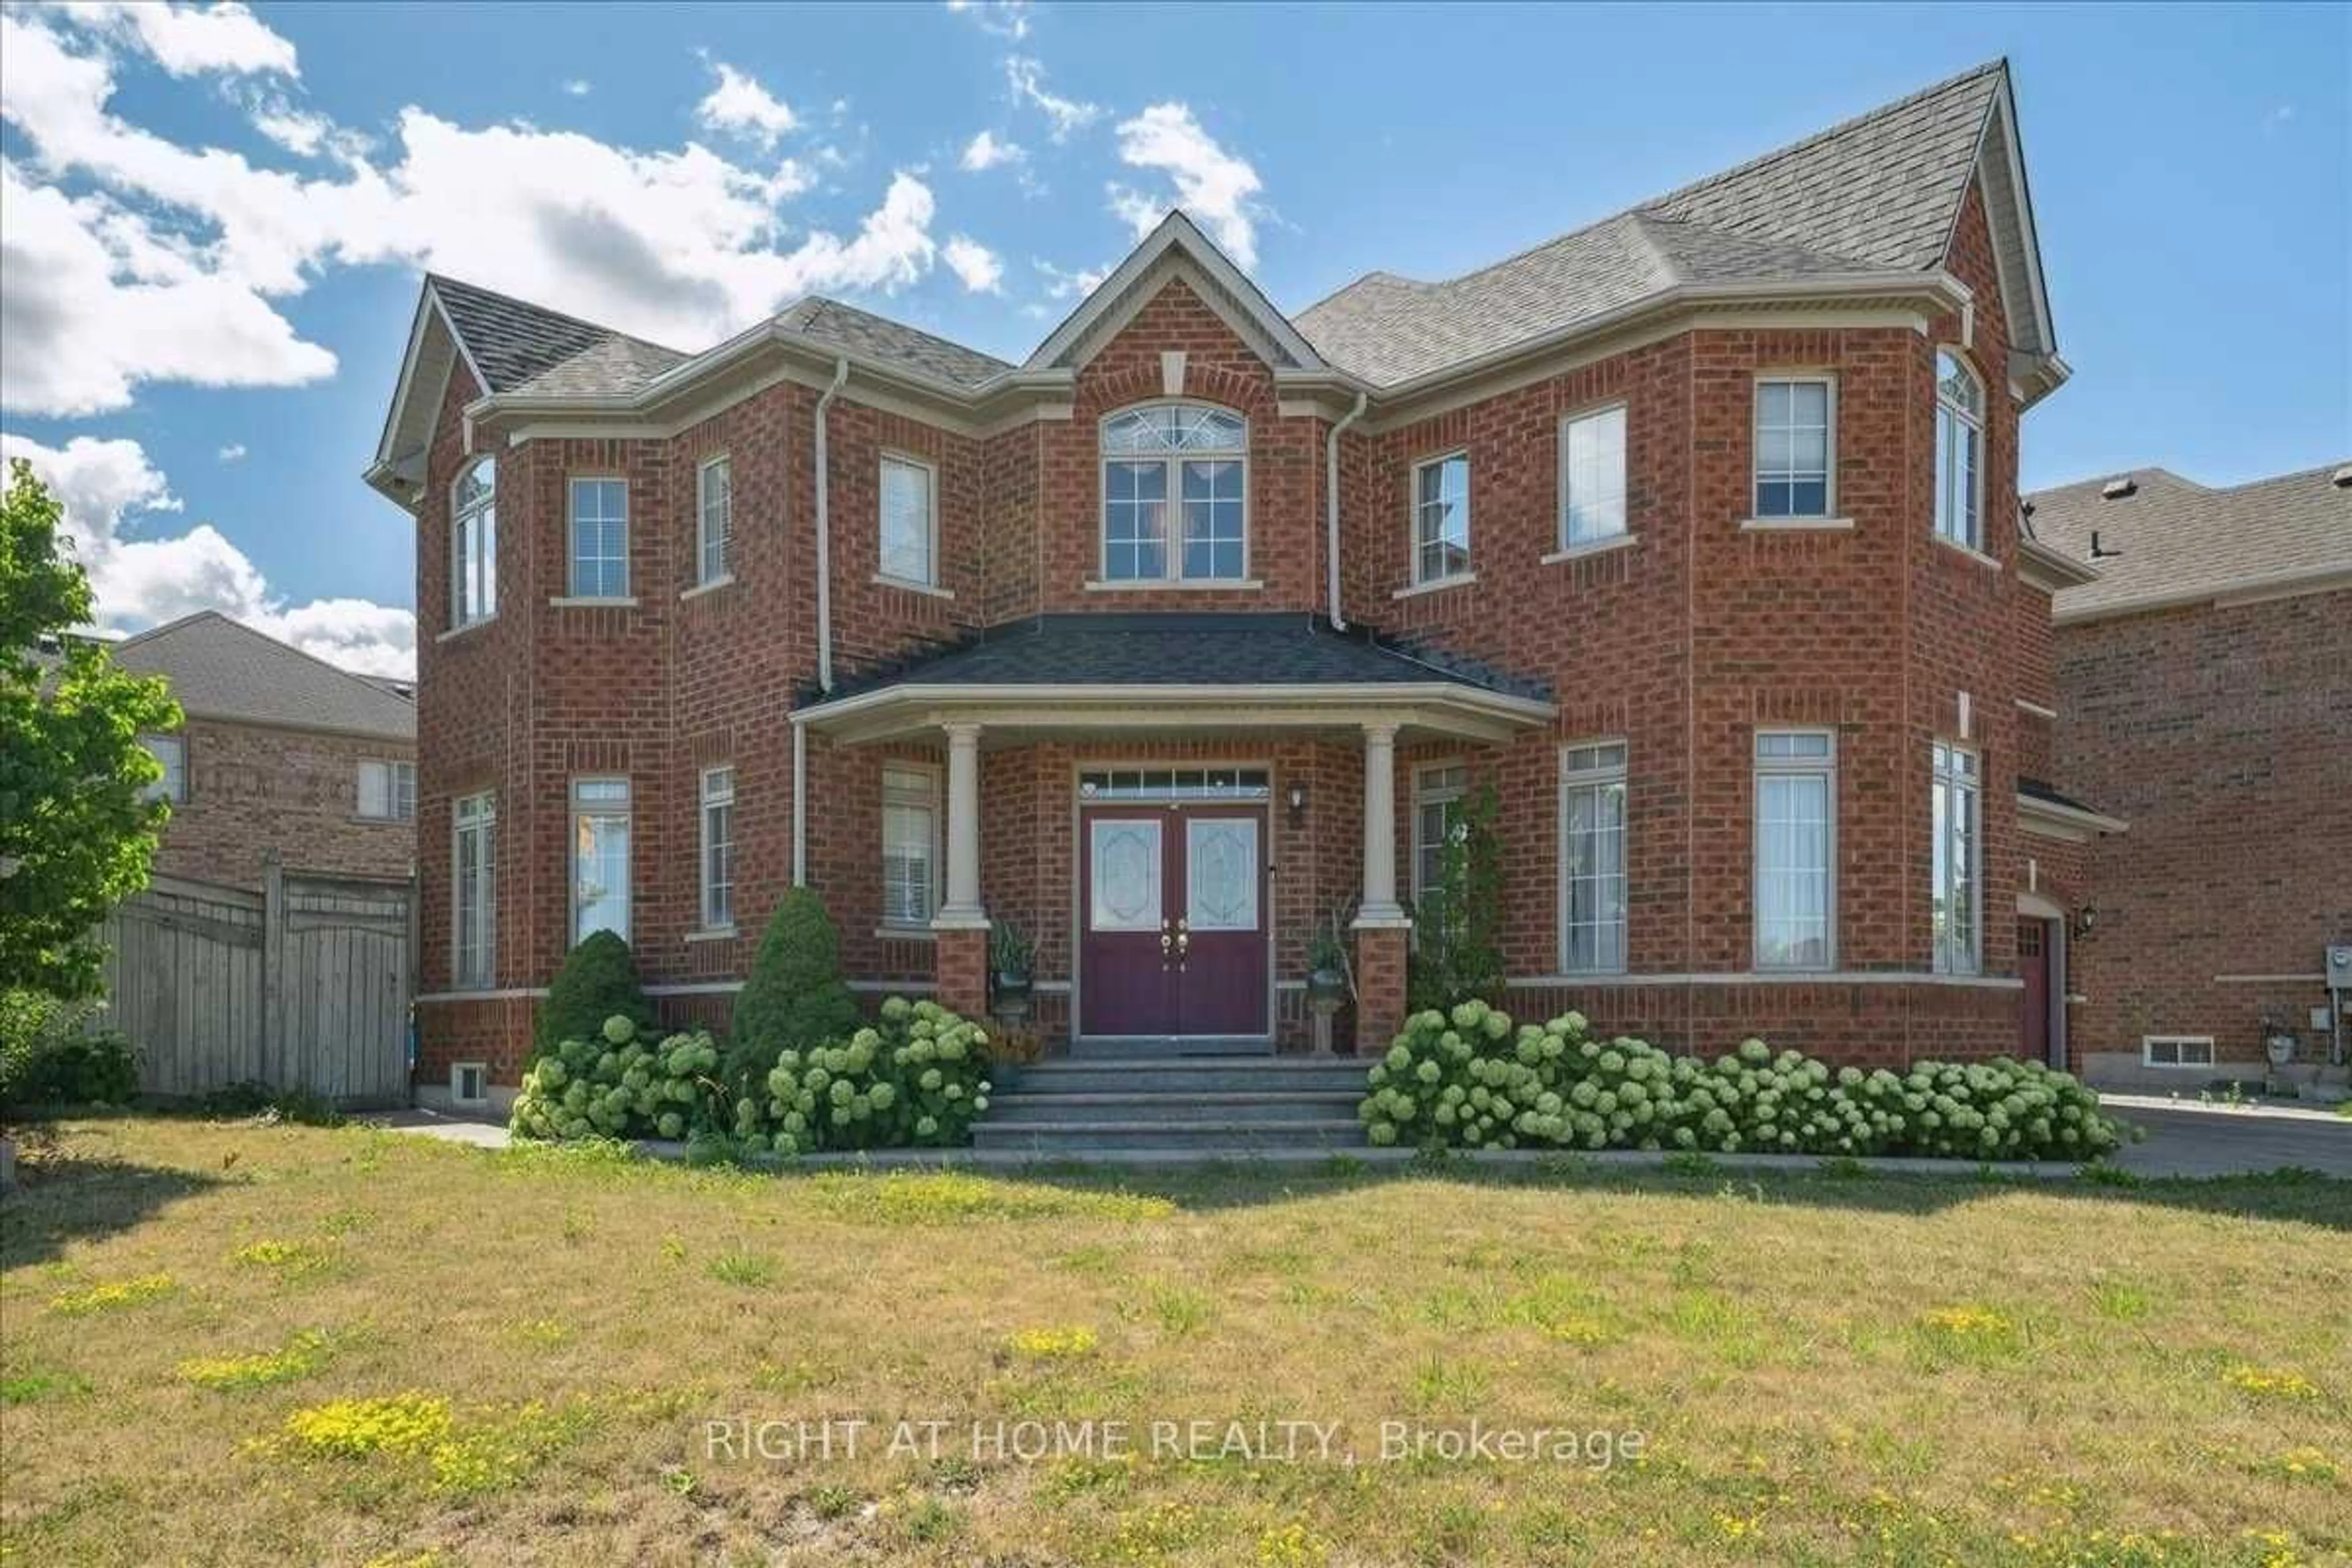 Home with brick exterior material for 130 Thorndale Rd, Brampton Ontario L6P 0Z6